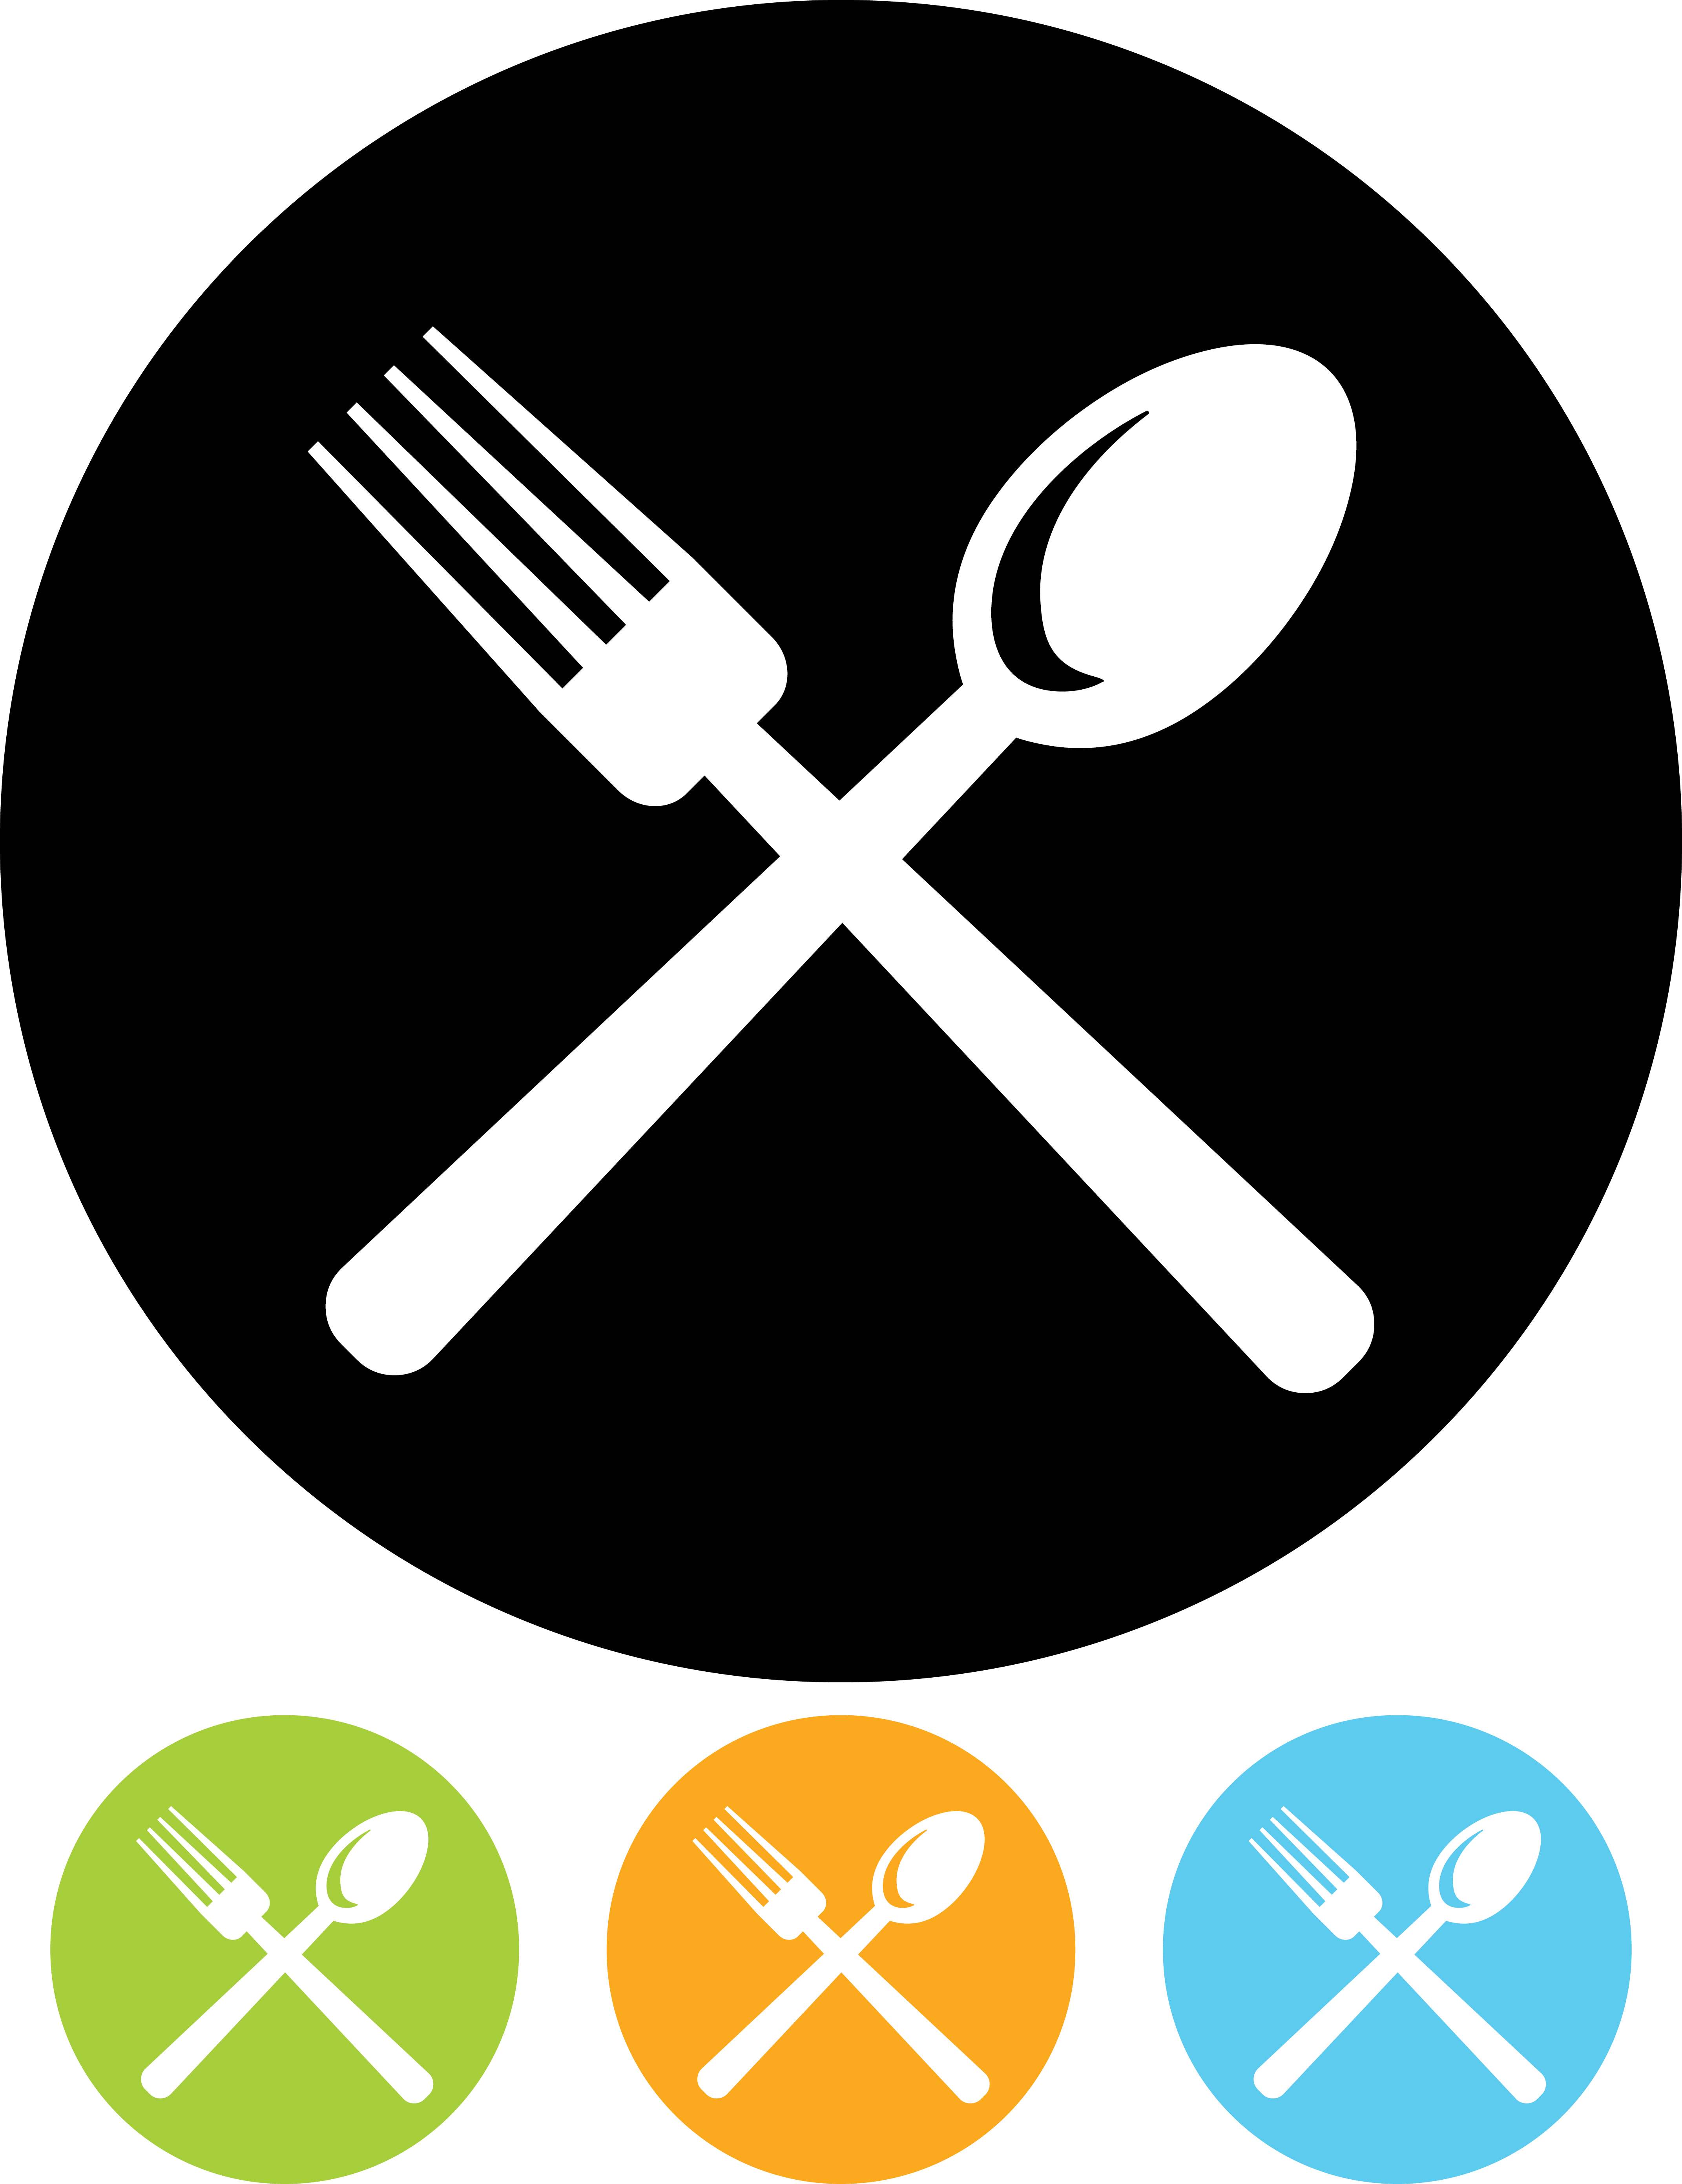 Free Fork And Spoon, Download Free Clip Art, Free Clip Art.